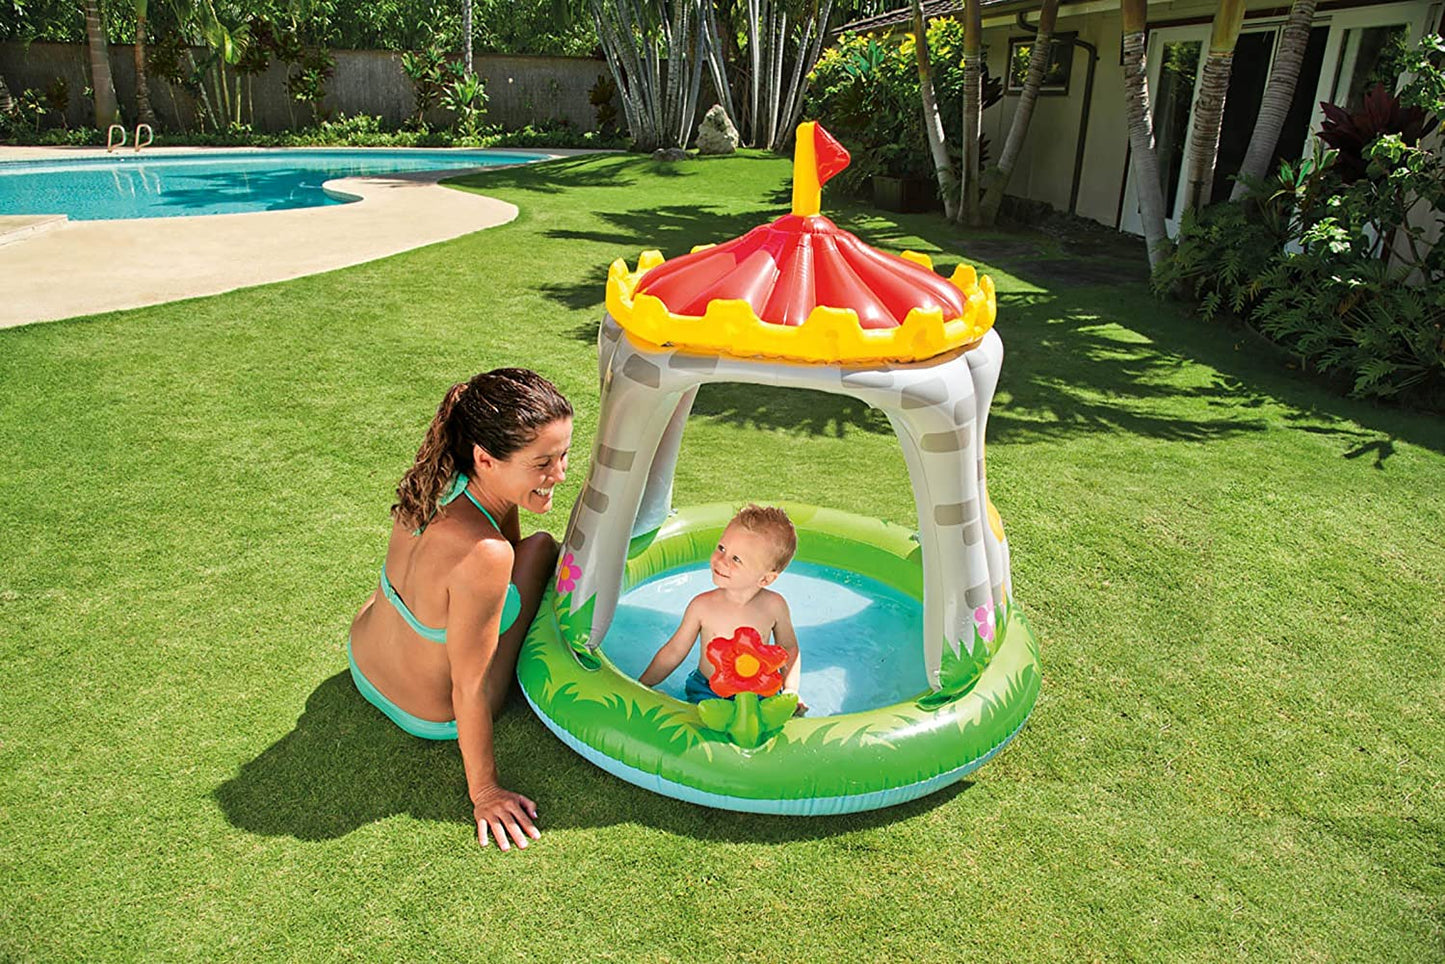 Intex 57122 Royal Castle Baby Pool | Blue | Water-Filled Fun for Ages 1-3 | 48x48 inches - Multicolor